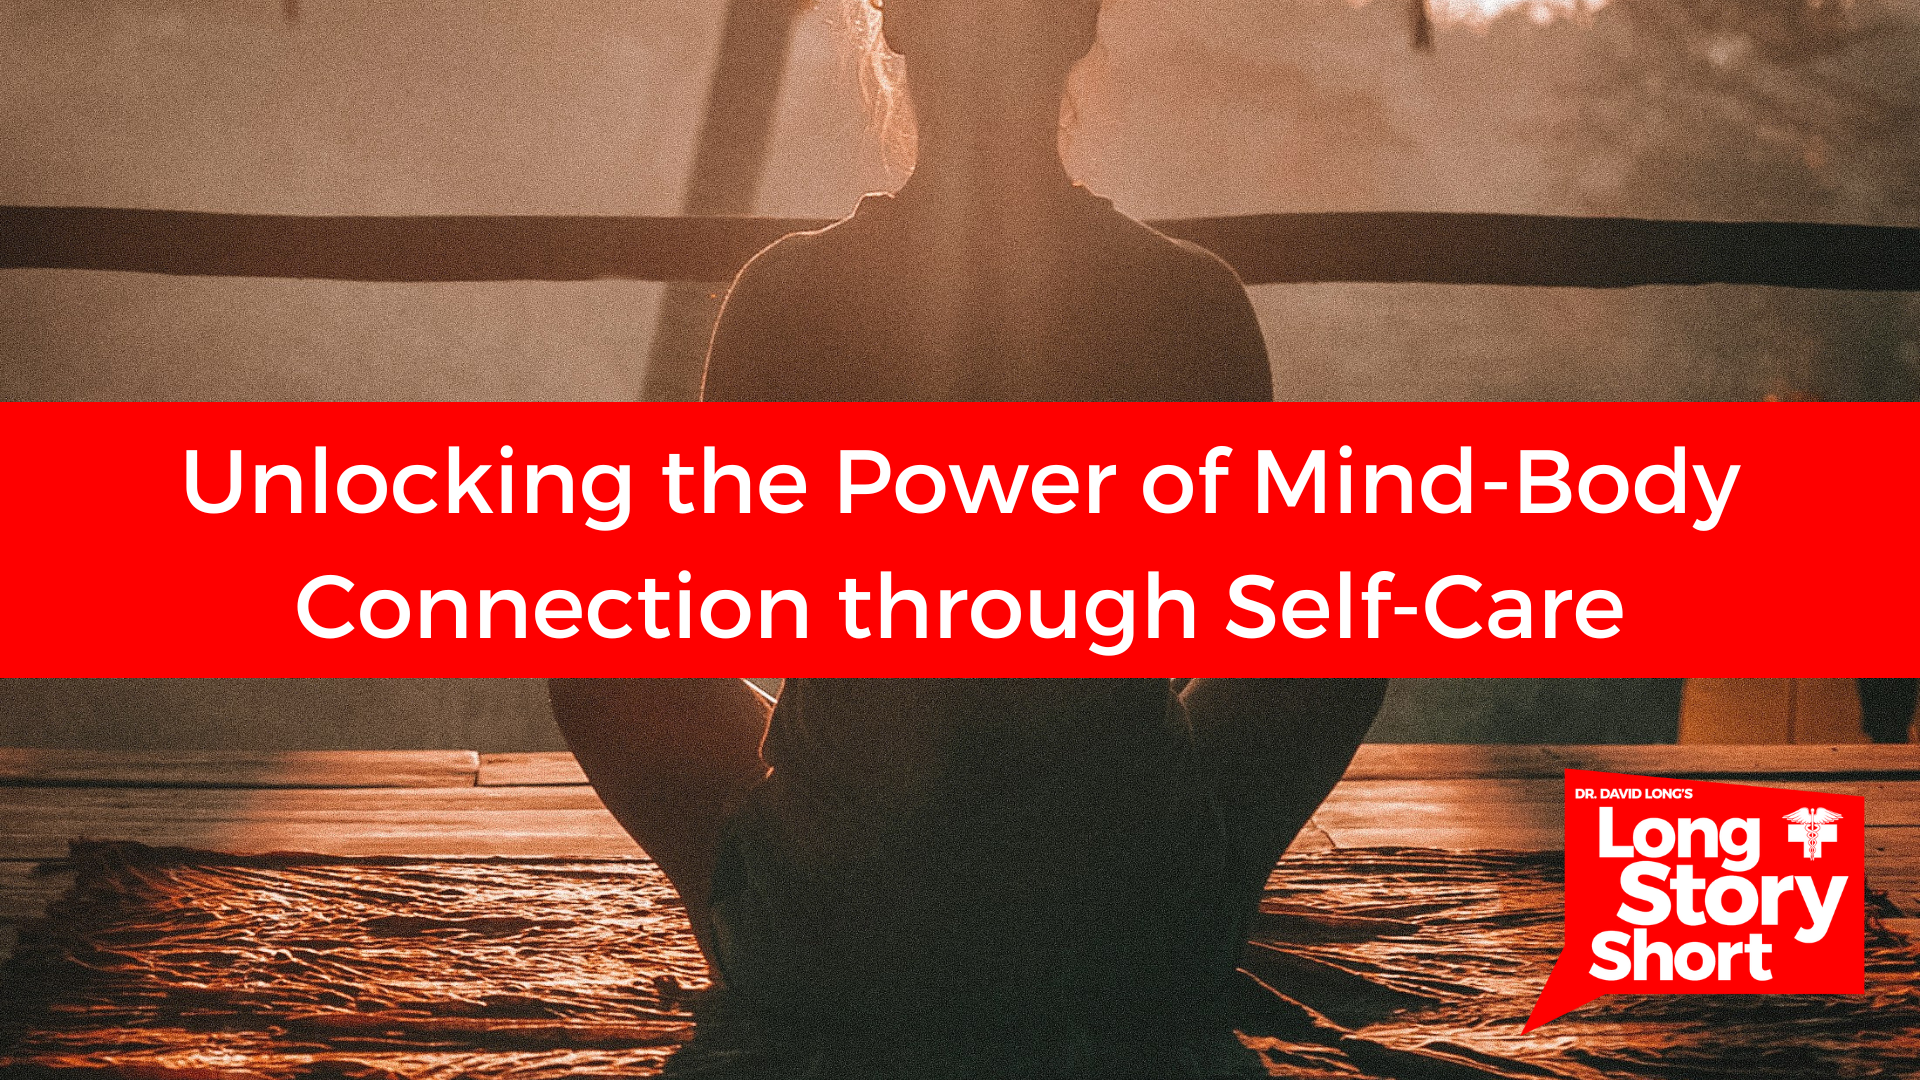 You are currently viewing Unlocking the Power of Mind-Body Connection through Self-Care – Dr. David Long